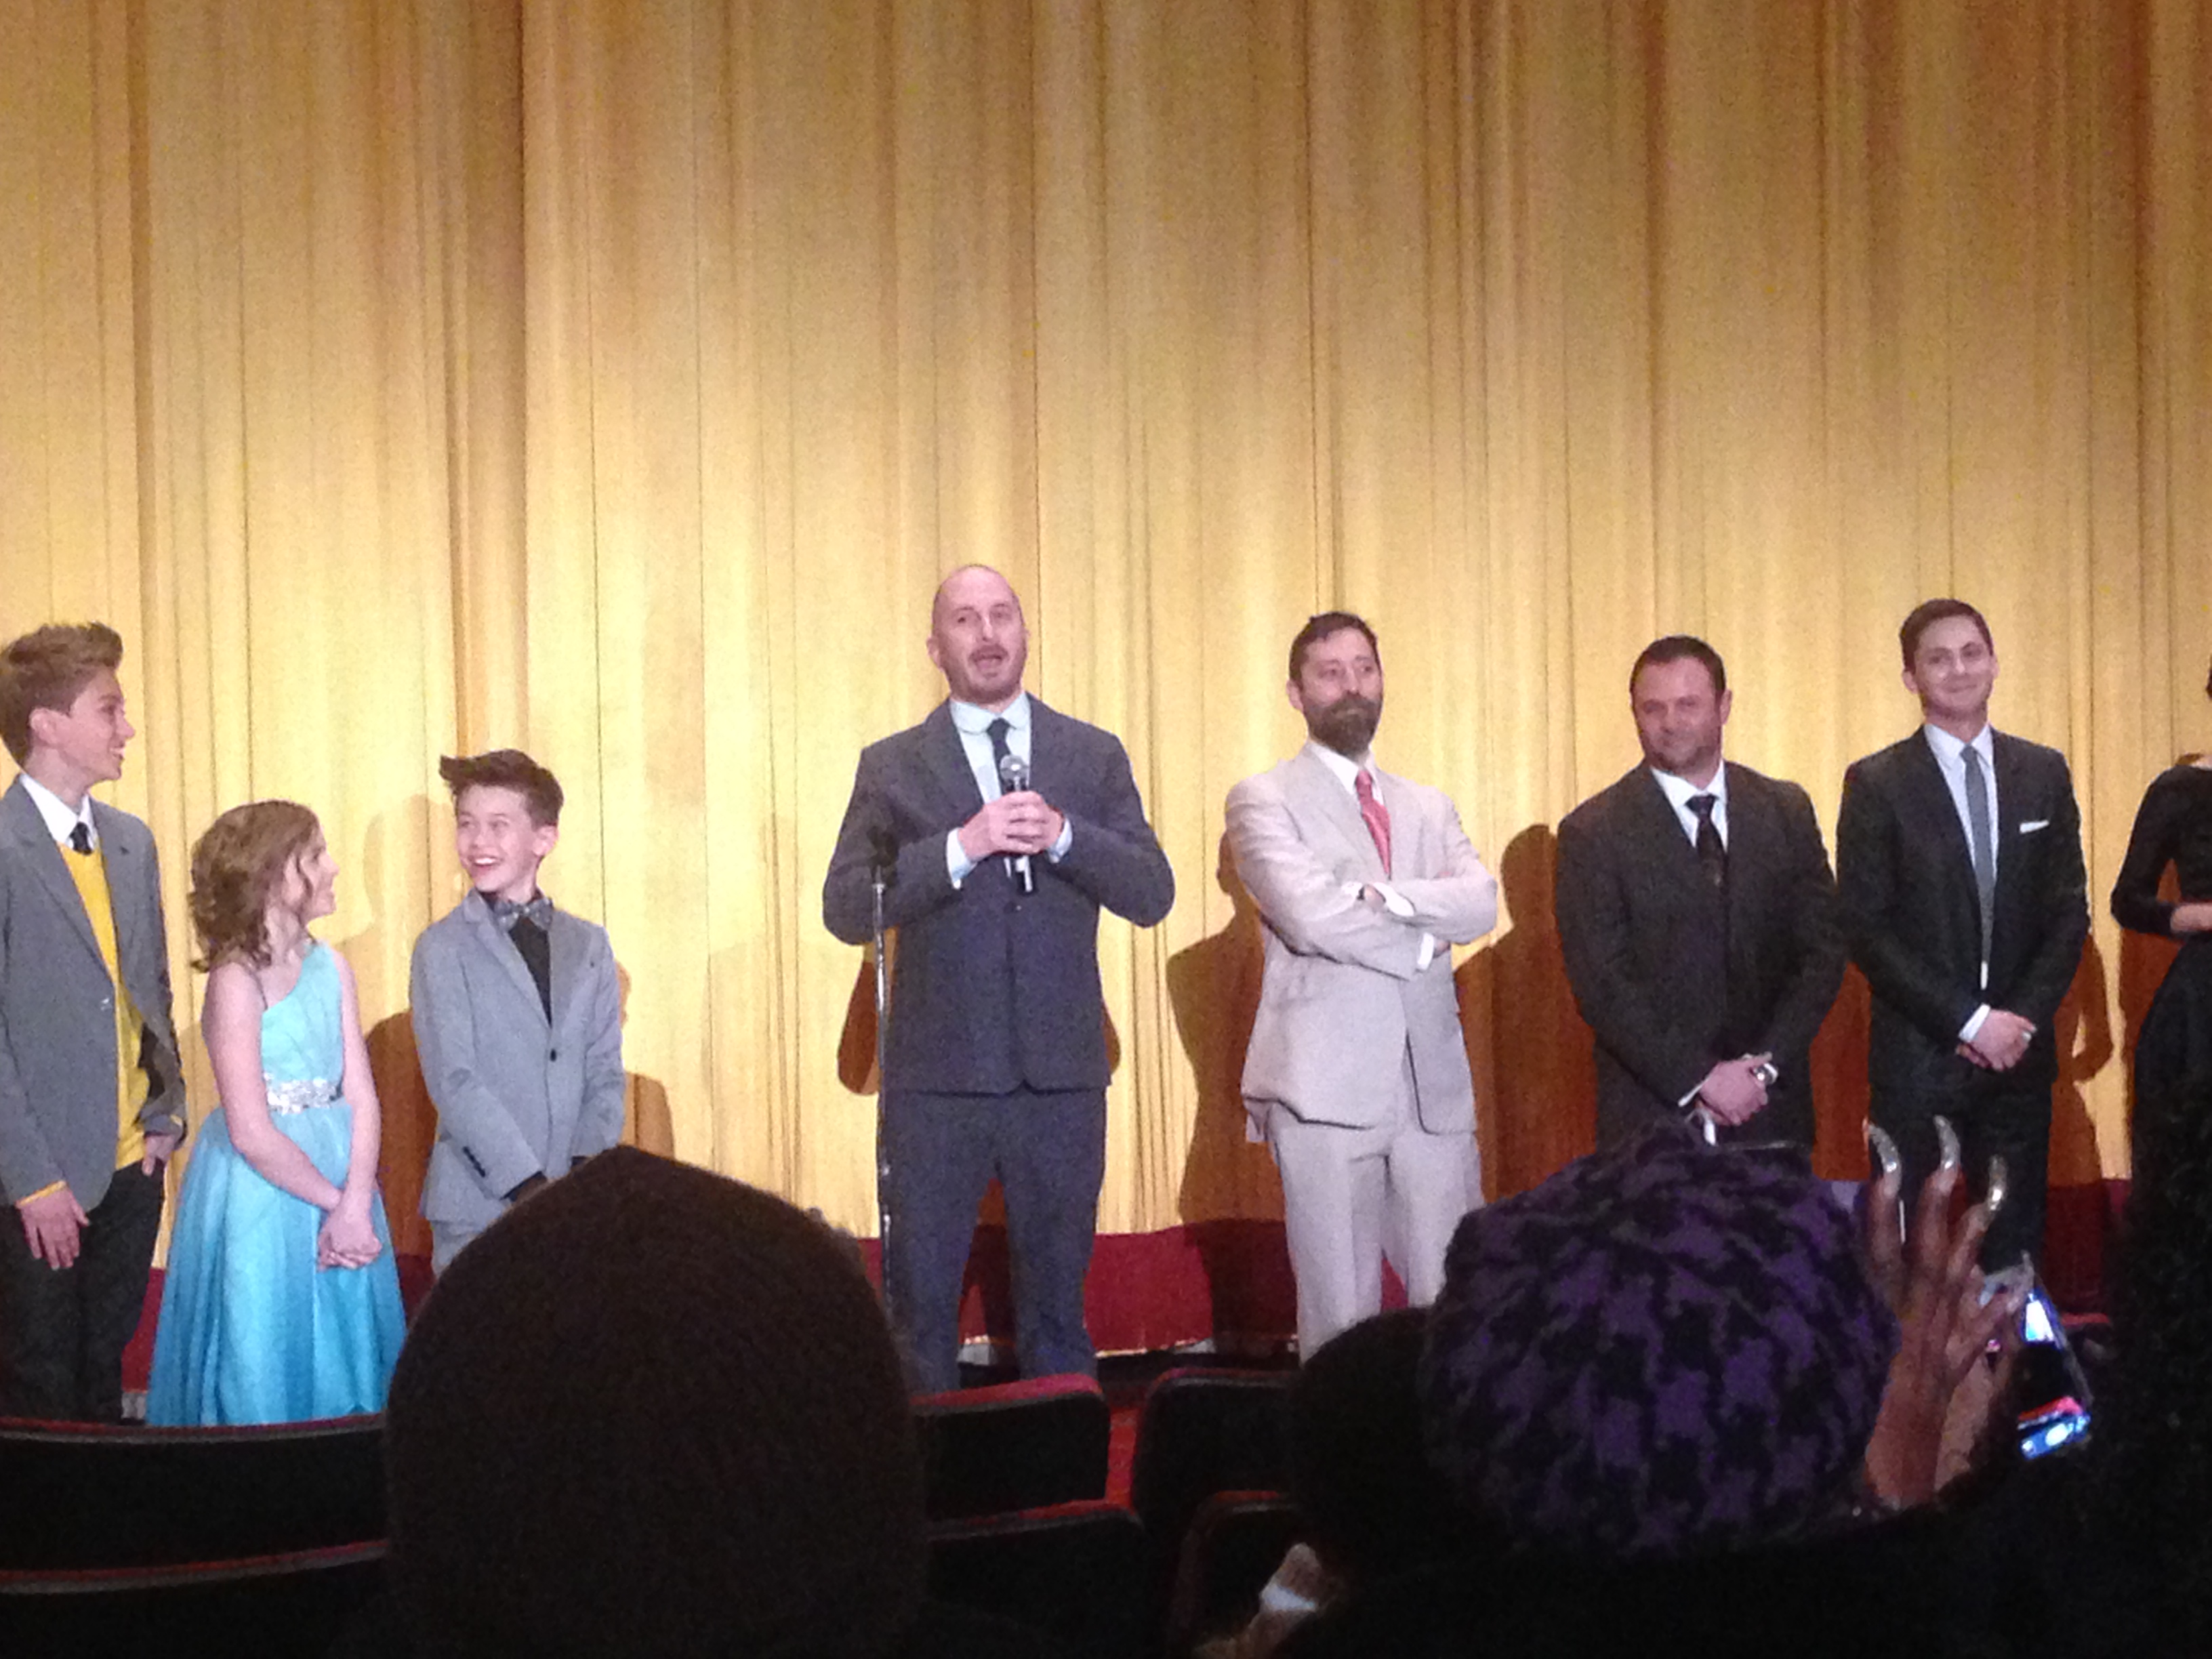 Darren Aronofsky introducing the cast of Noah at the NYC Premiere.